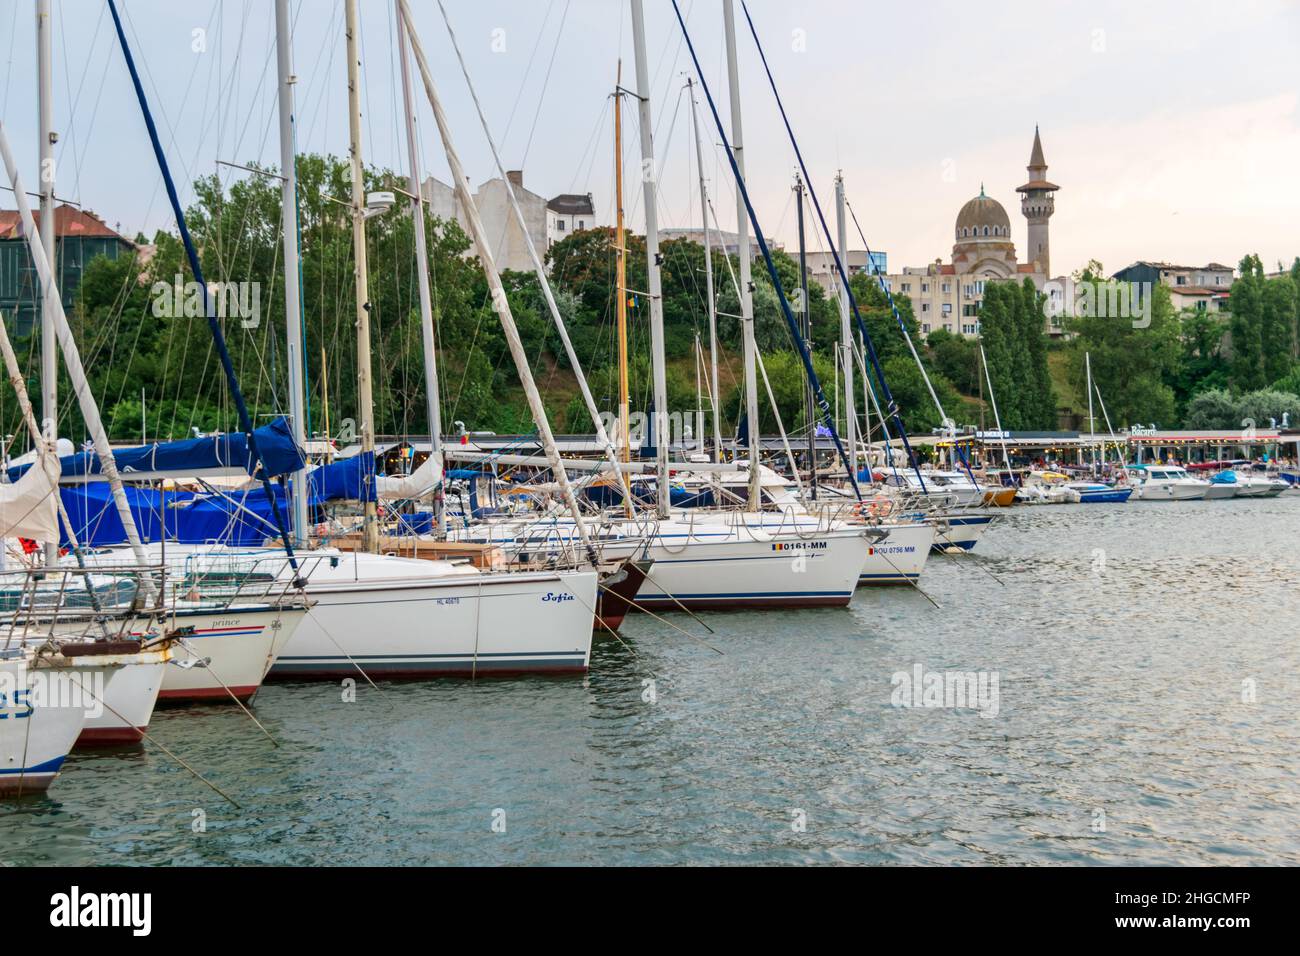 Boats from the Tomis Touristic Port, Constanta, Romania Stock Photo